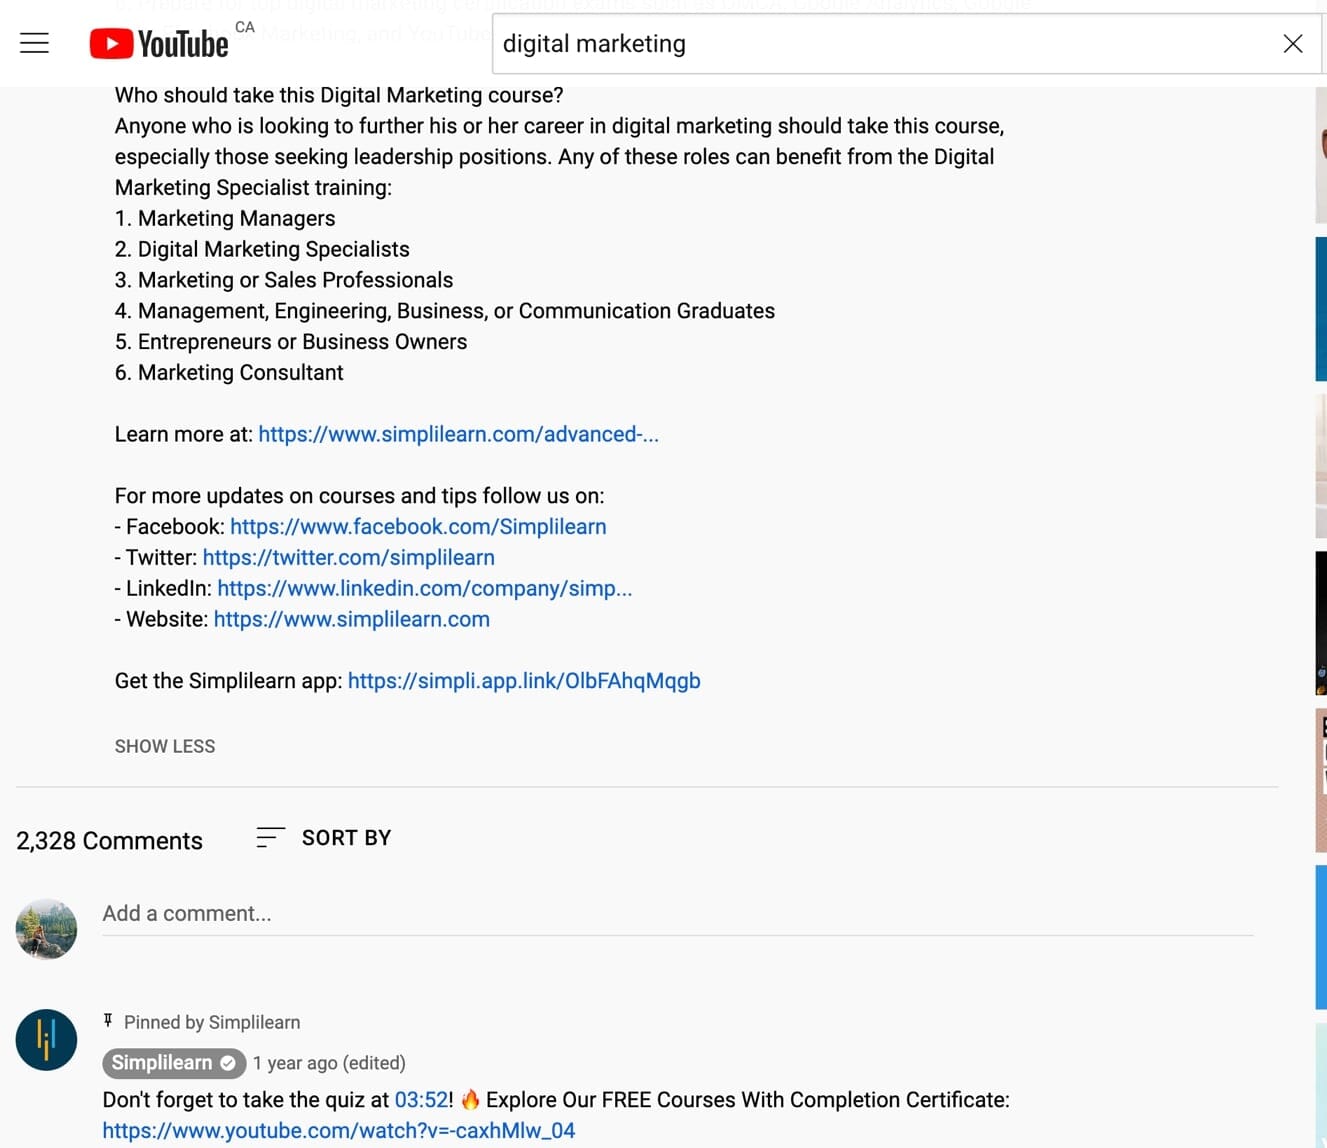 digital marketing search results on youtube